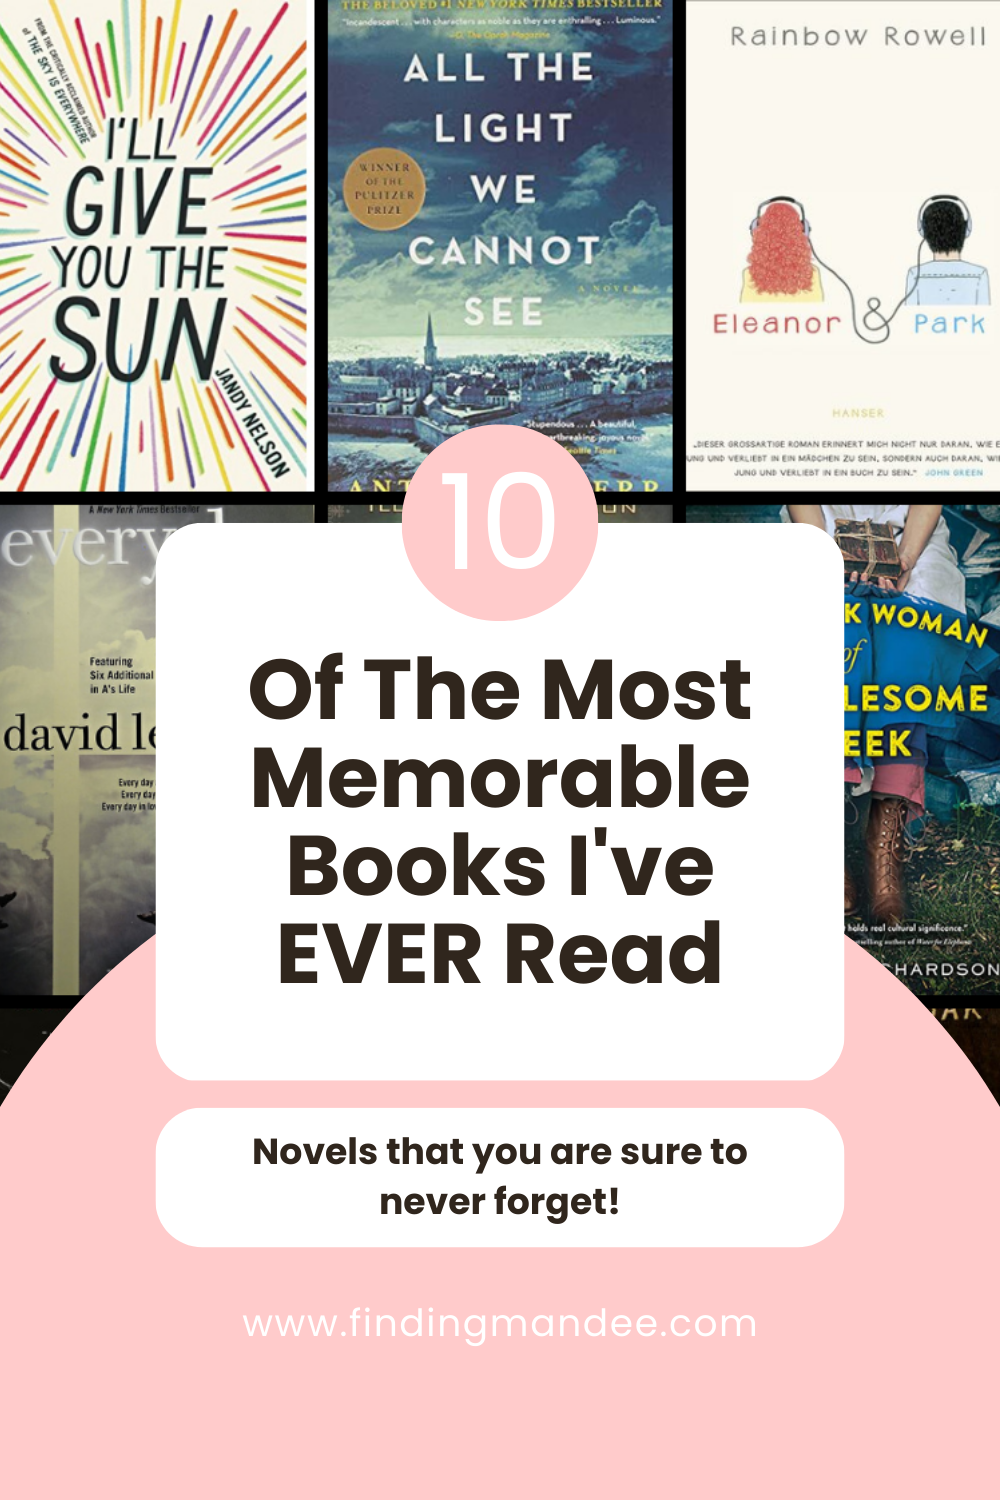 10 Of the Most Memorable Books I've Ever Read | Finding Mandee